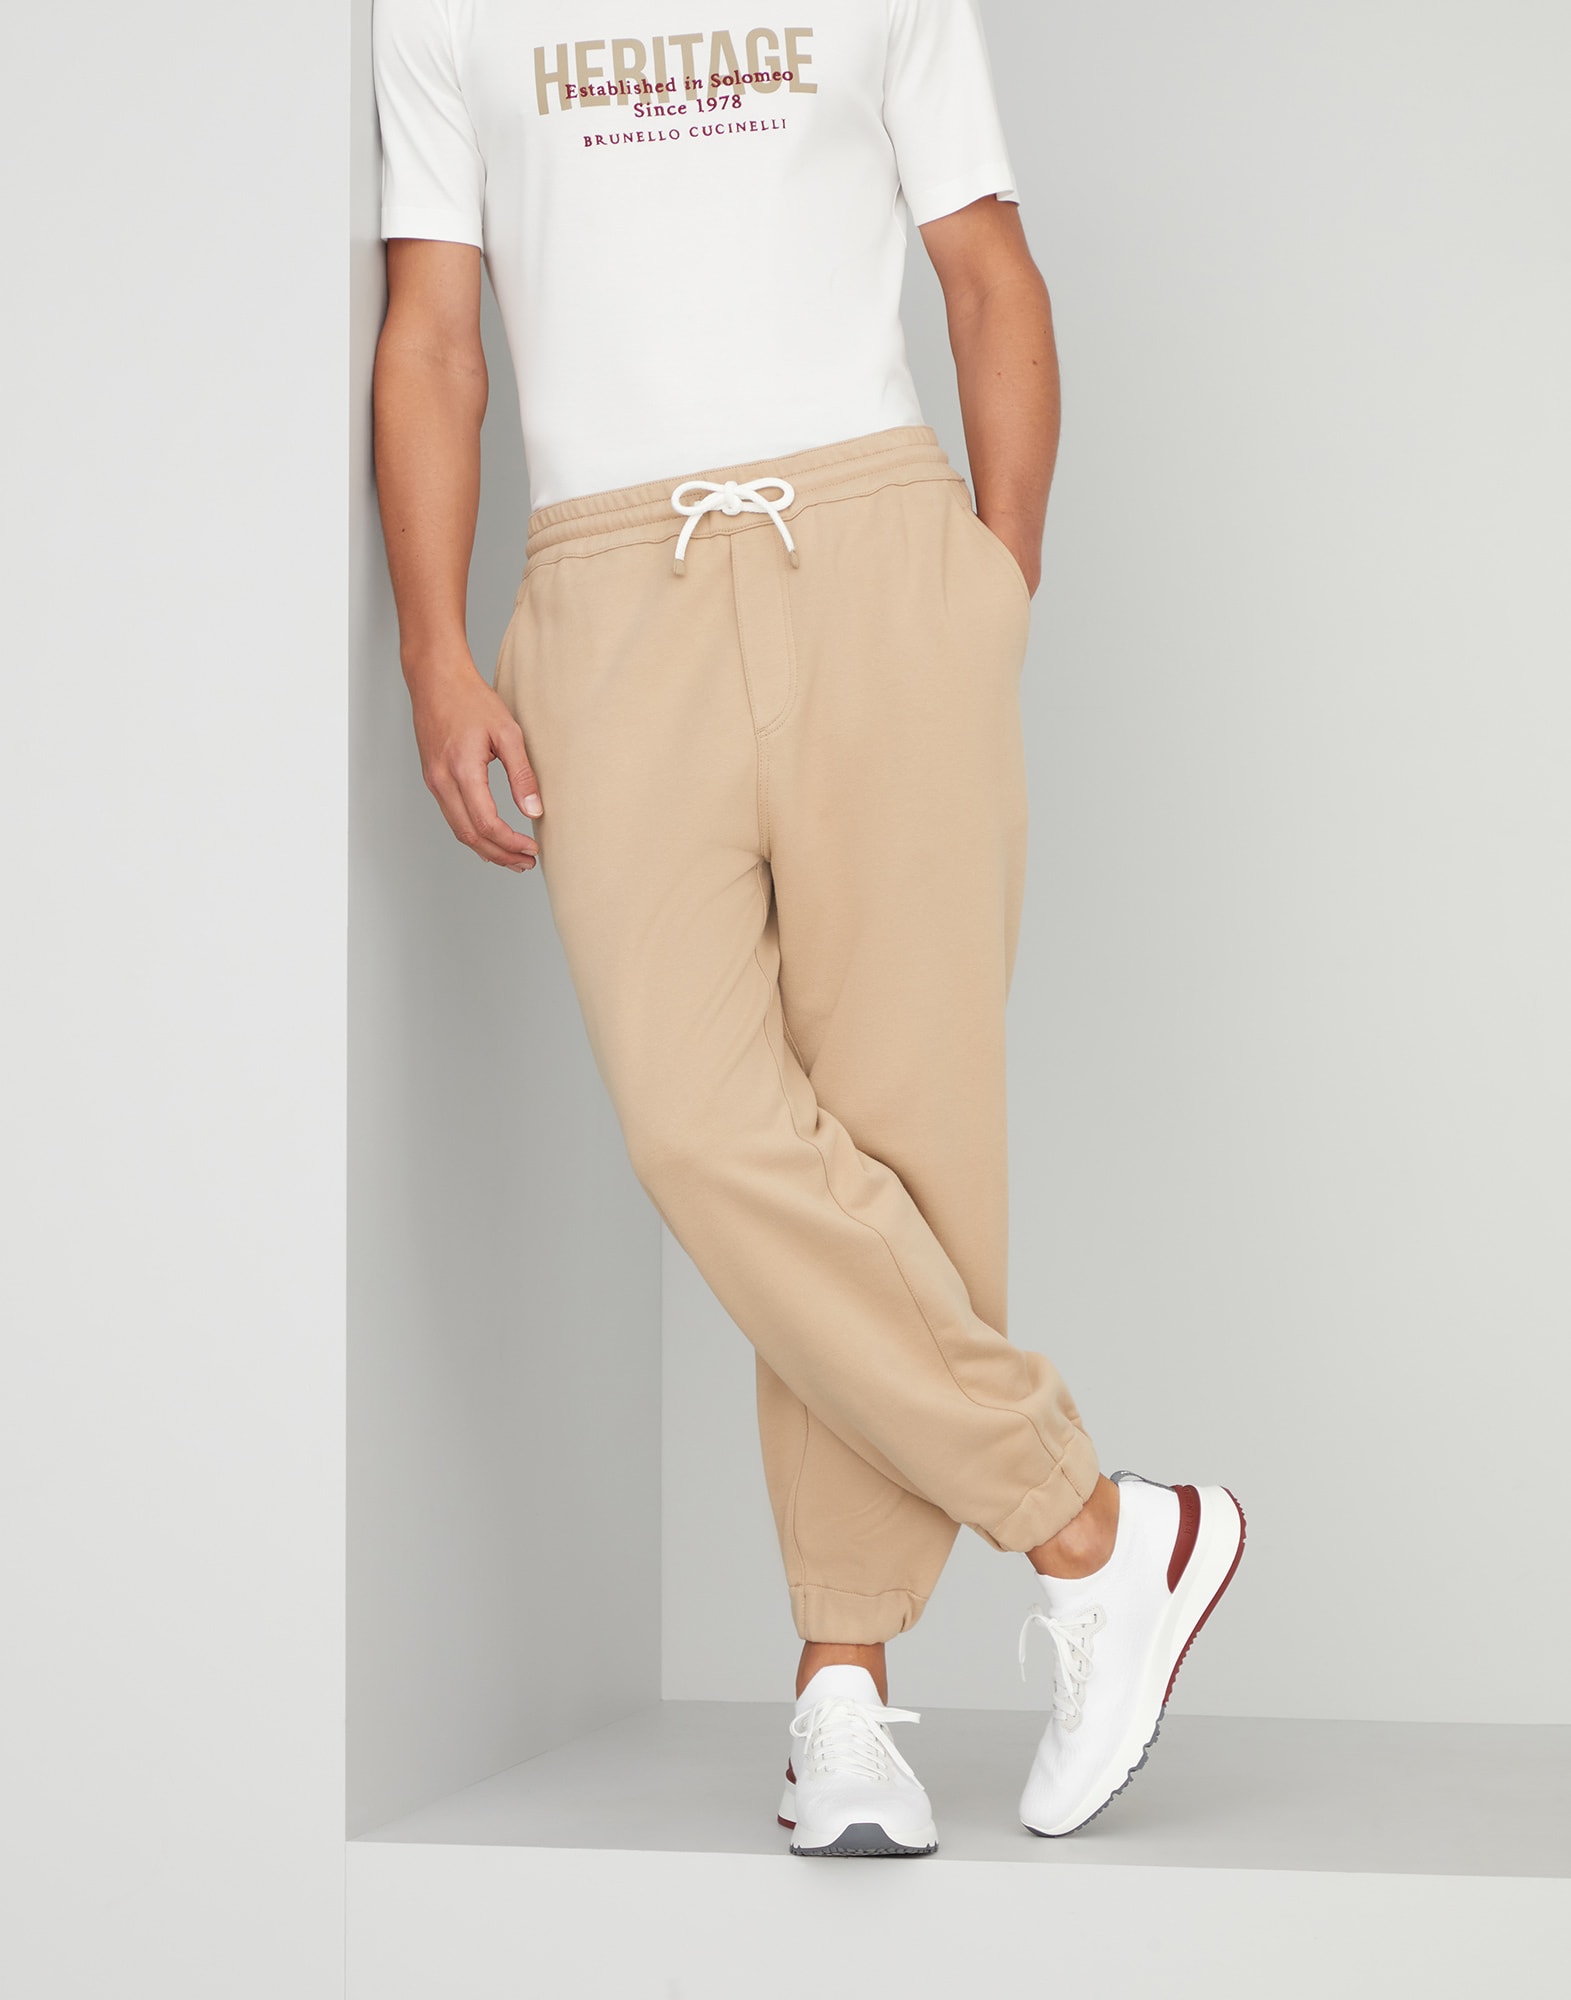 French terry trousers